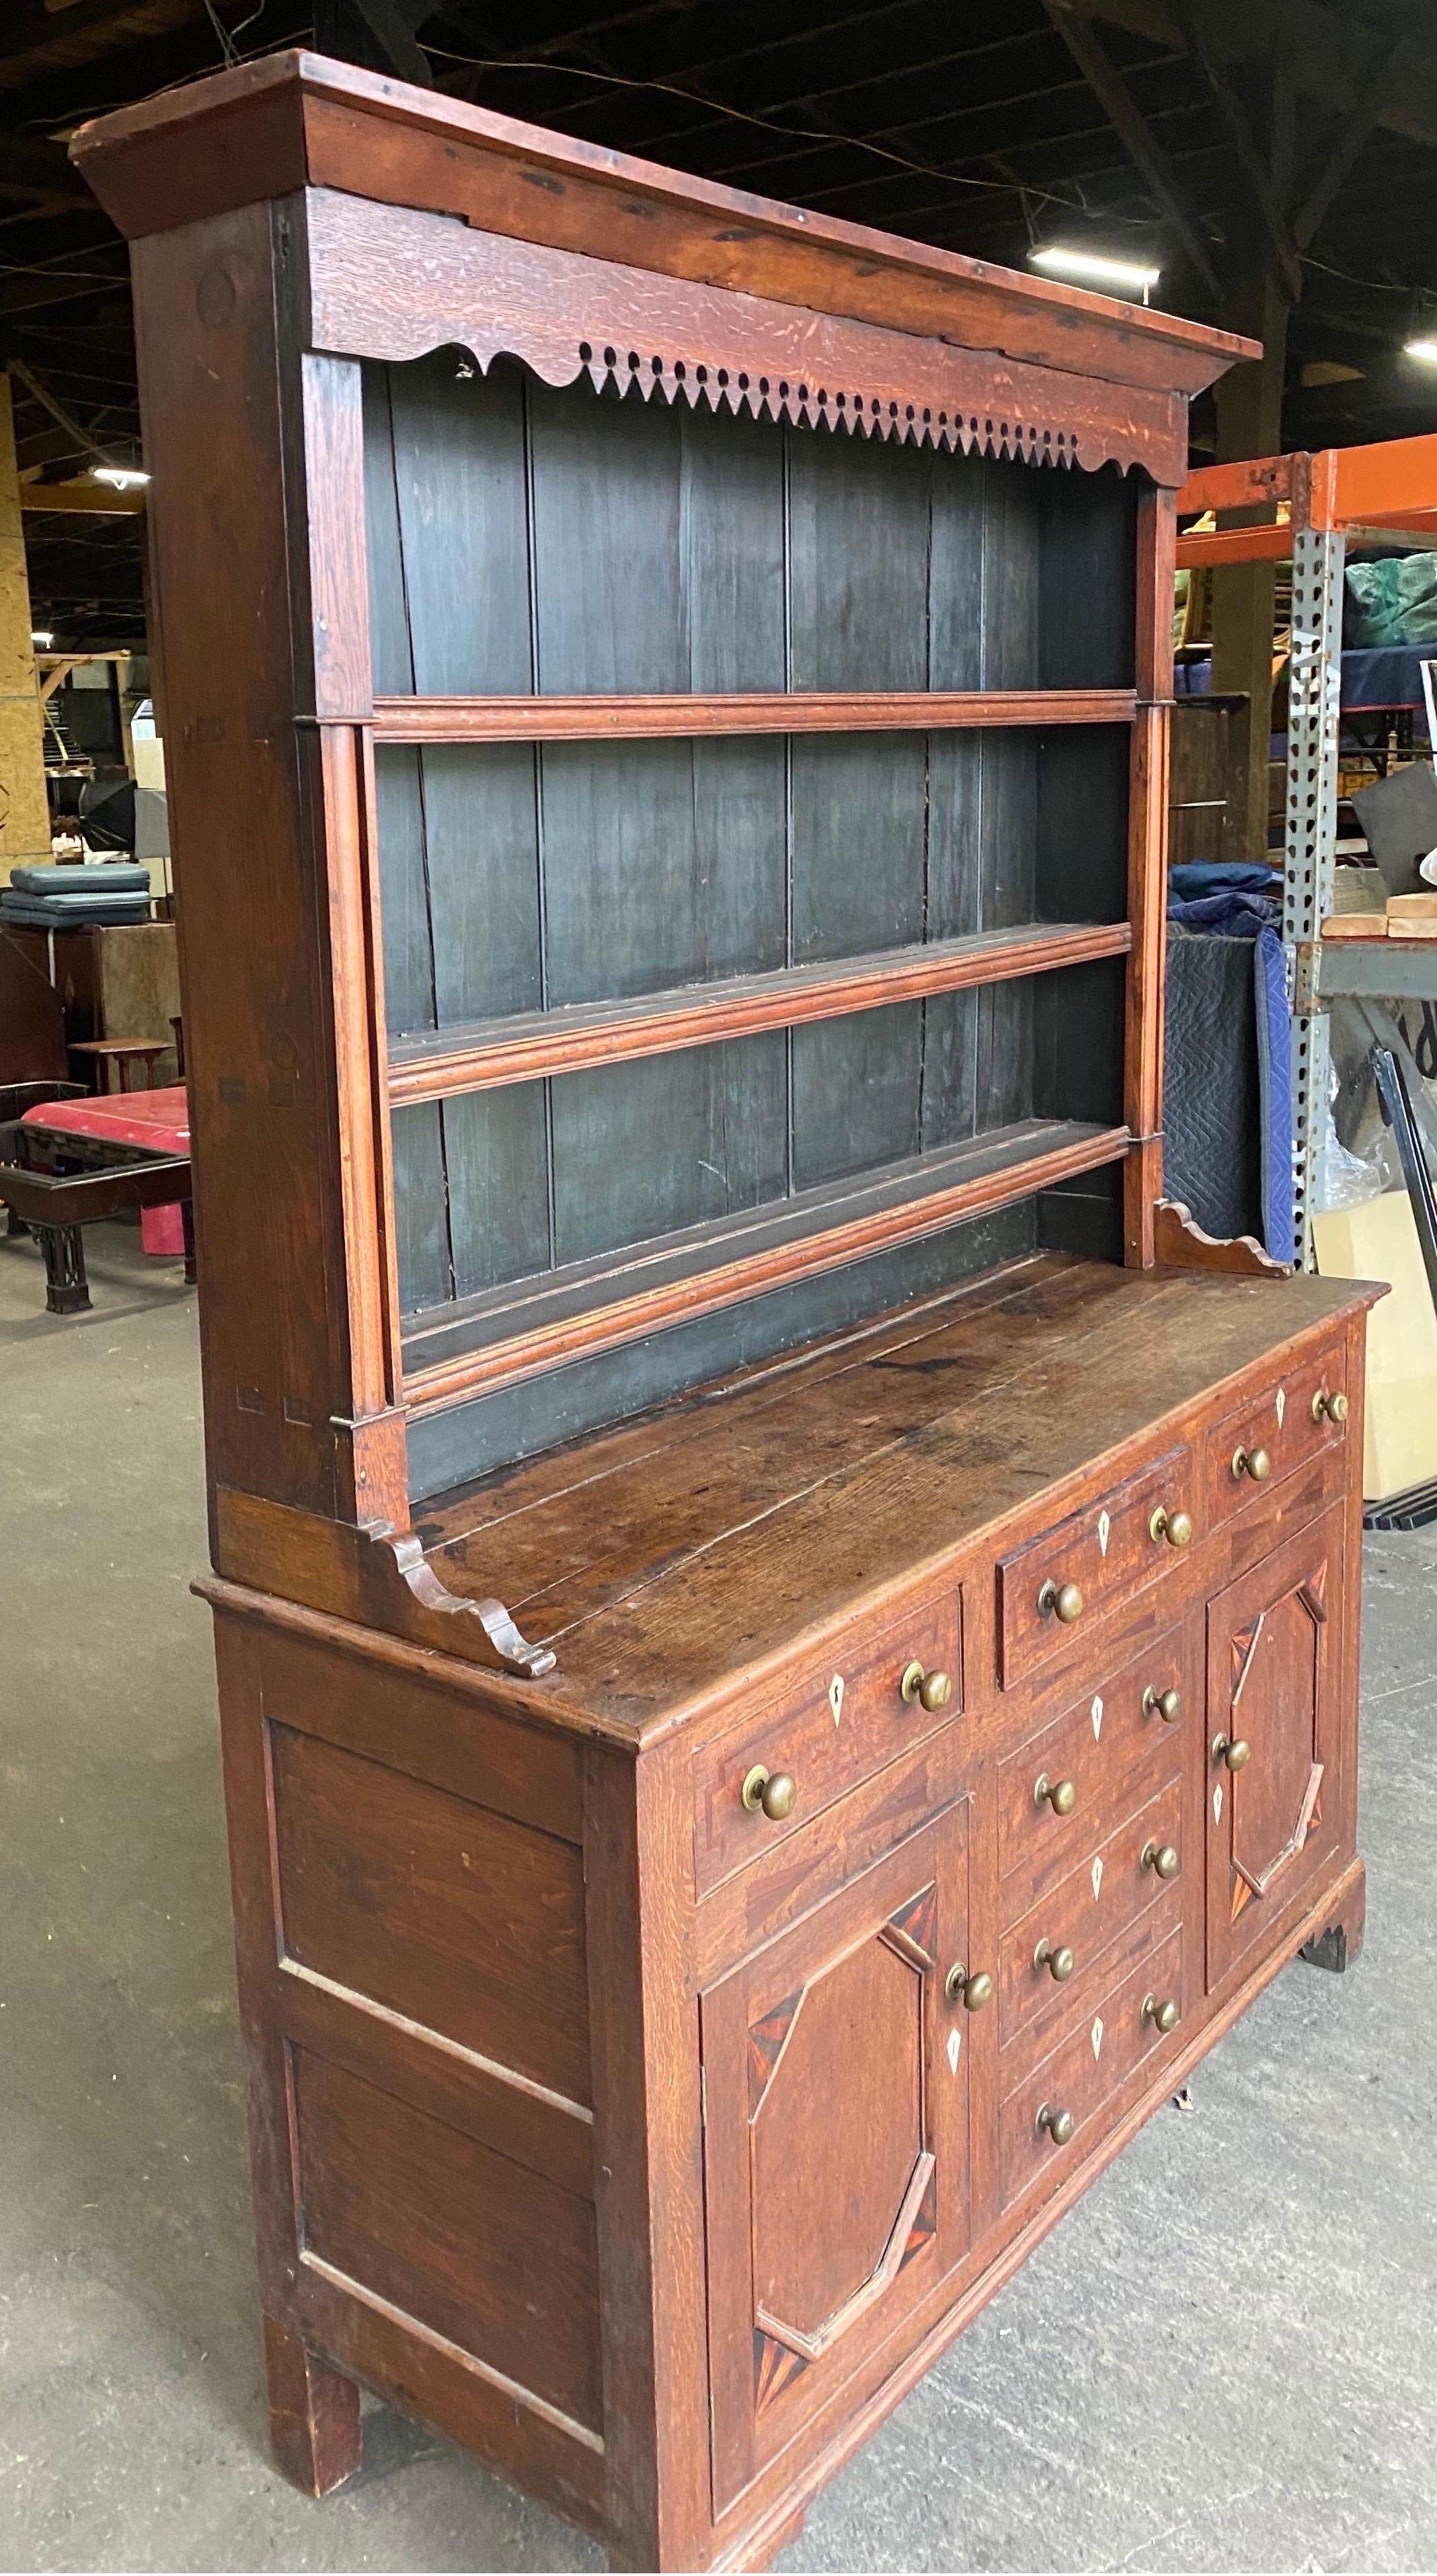 19th century inlaid Welsh oak cupboard. 2 part oak cupboard with inlaid quarter fans and escutcheons. Base has three drawers over two doors and three faux drawers.